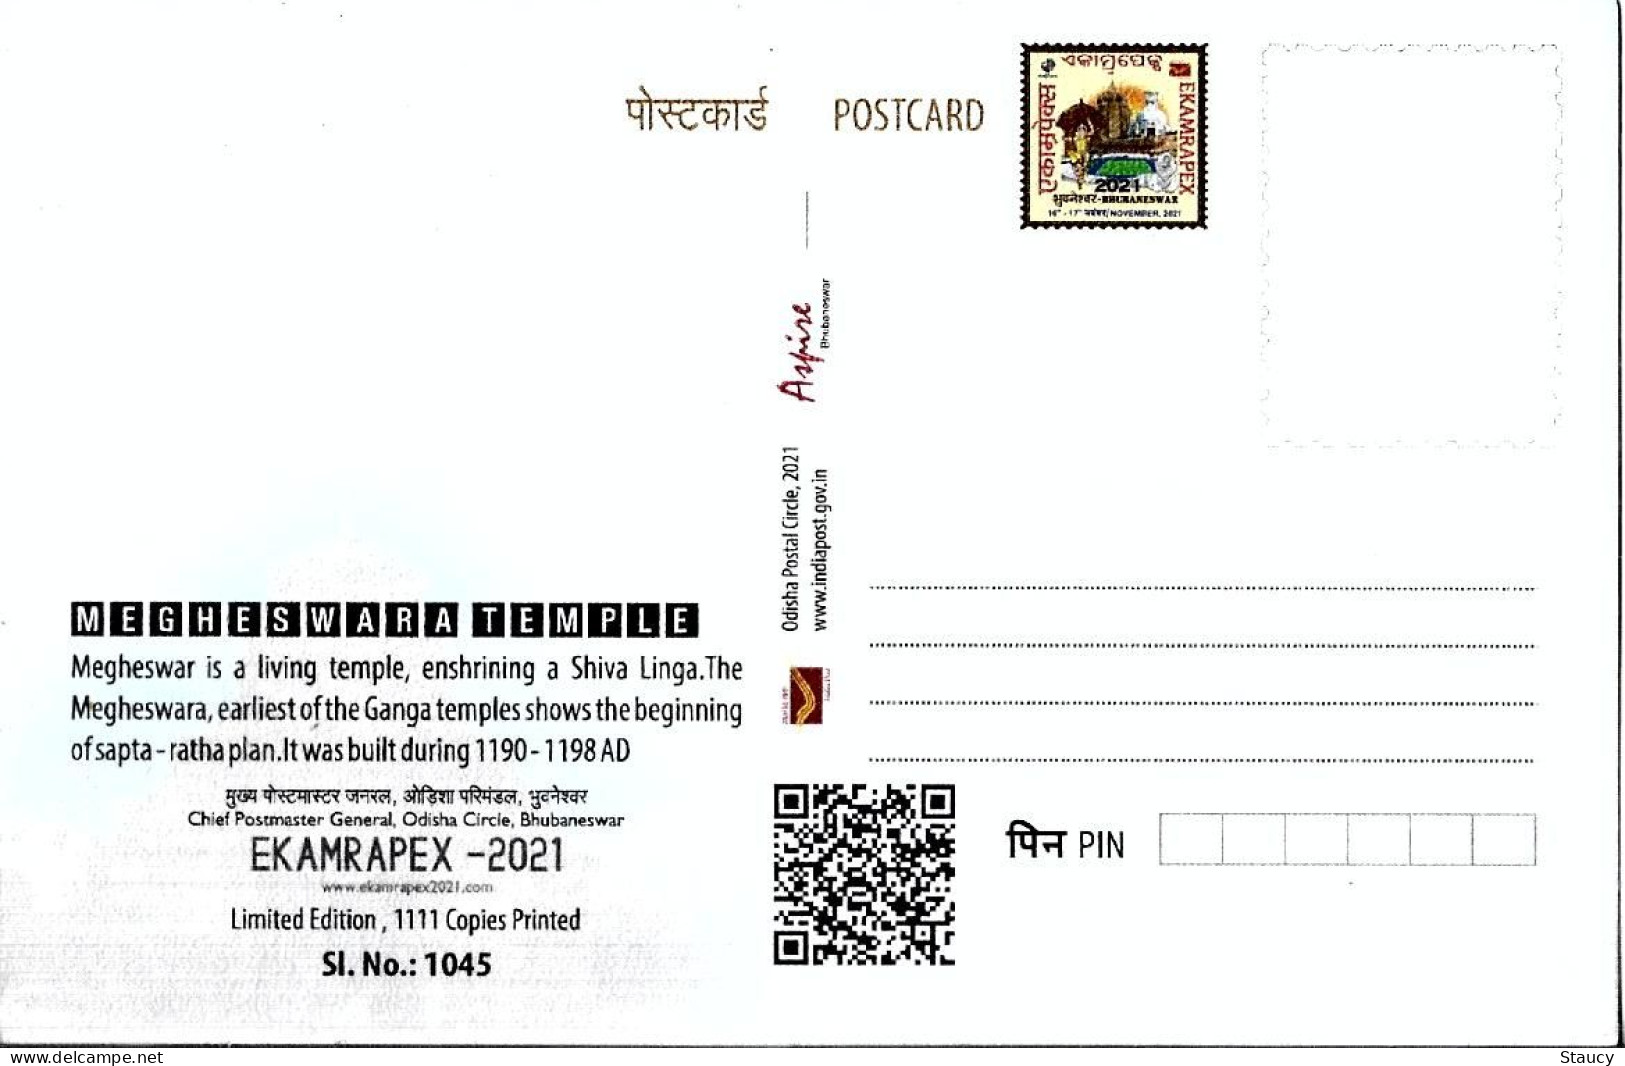 INDIA ODISHA 2021 Ekamrapex'2021 MEGHESWARA TEMPLE PICTURE POST CARD (LIMITED ISSUE) As Per Scan - Hinduism